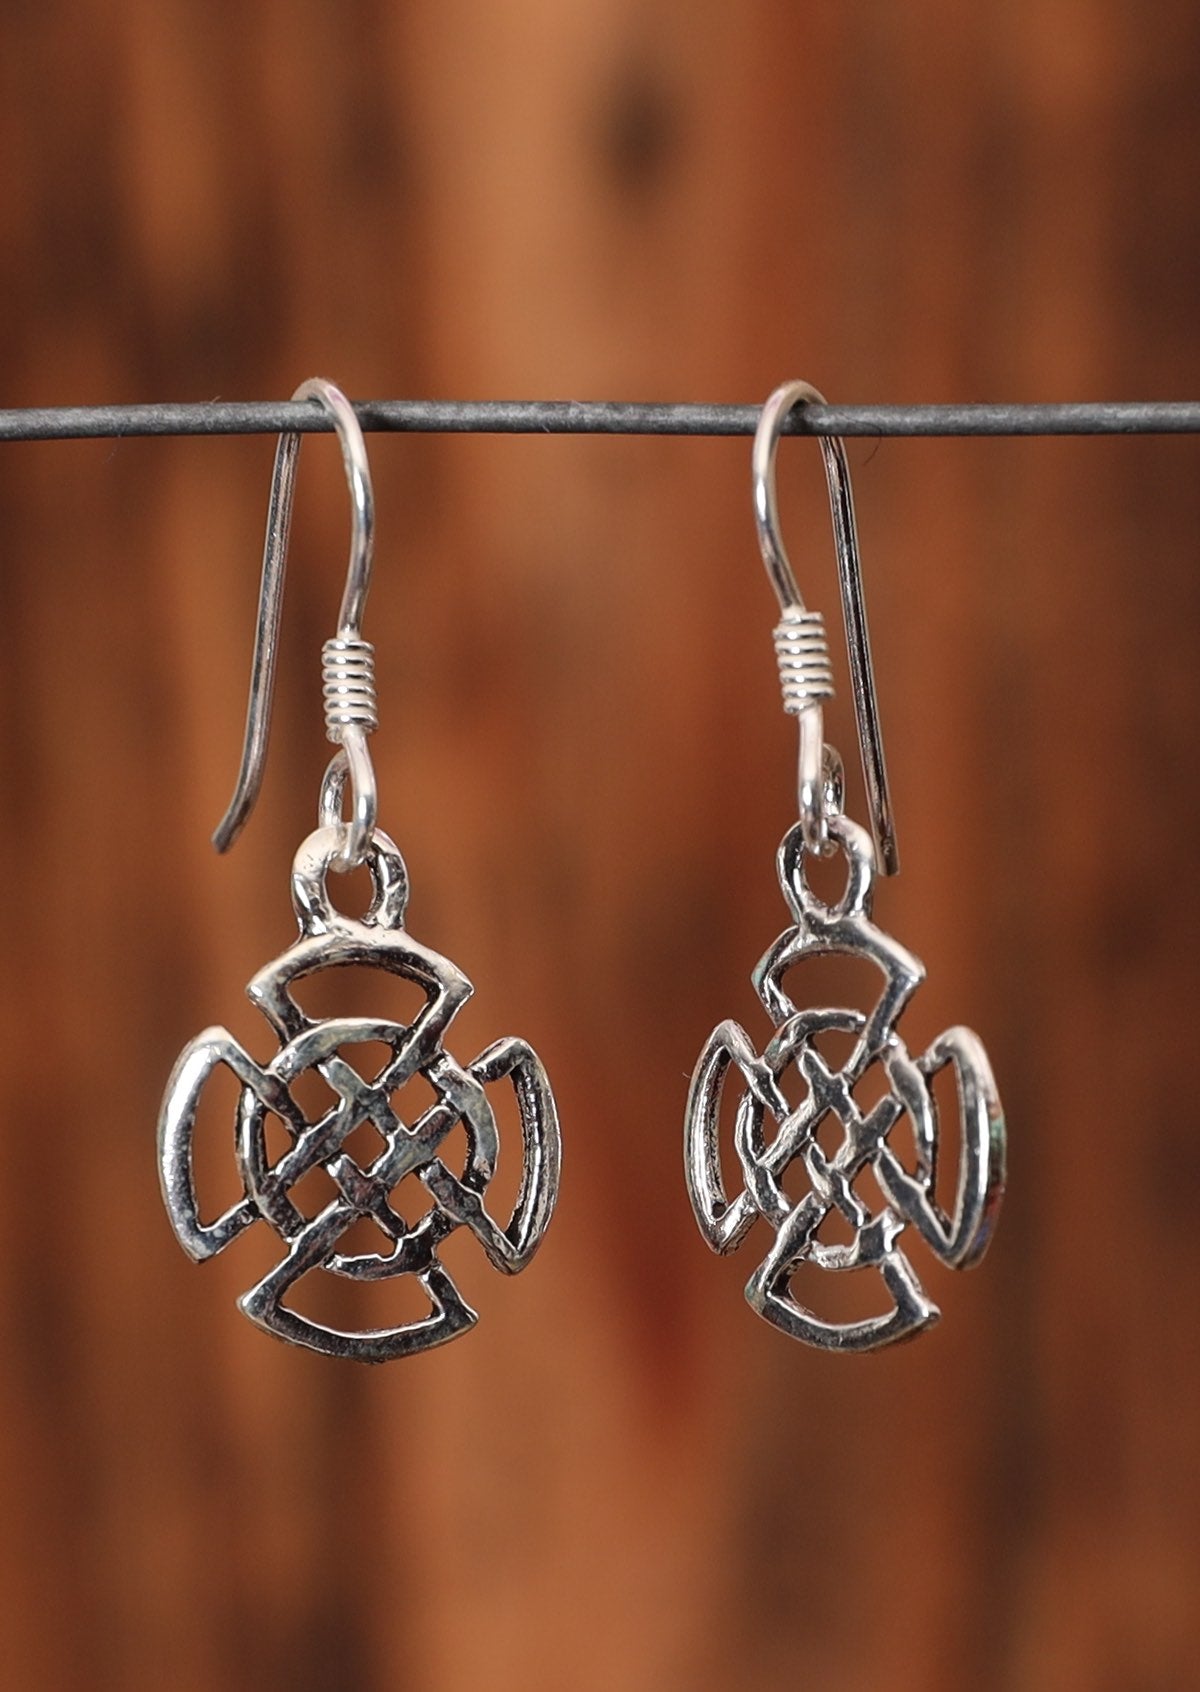 92.5% silver Celtic style woven shield earrings on a wire for display.